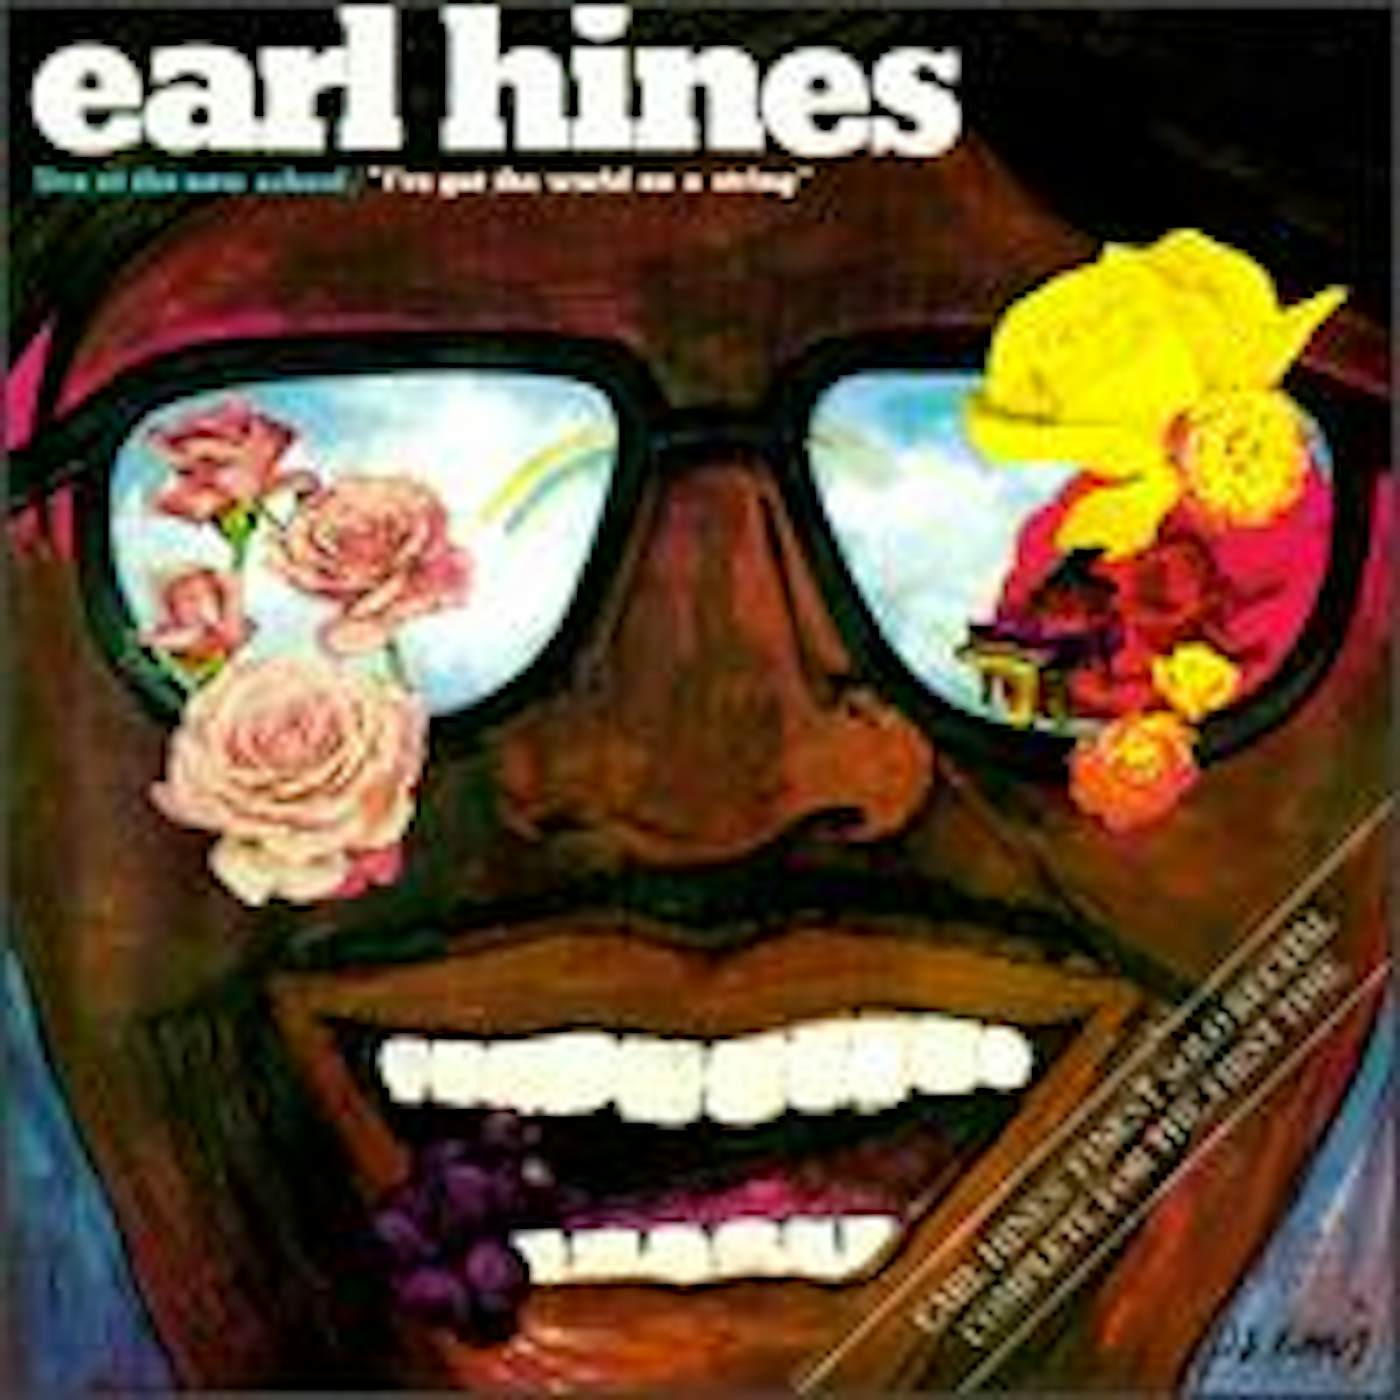 Earl Hines LIVE AT THE NEW SCHOOL CD